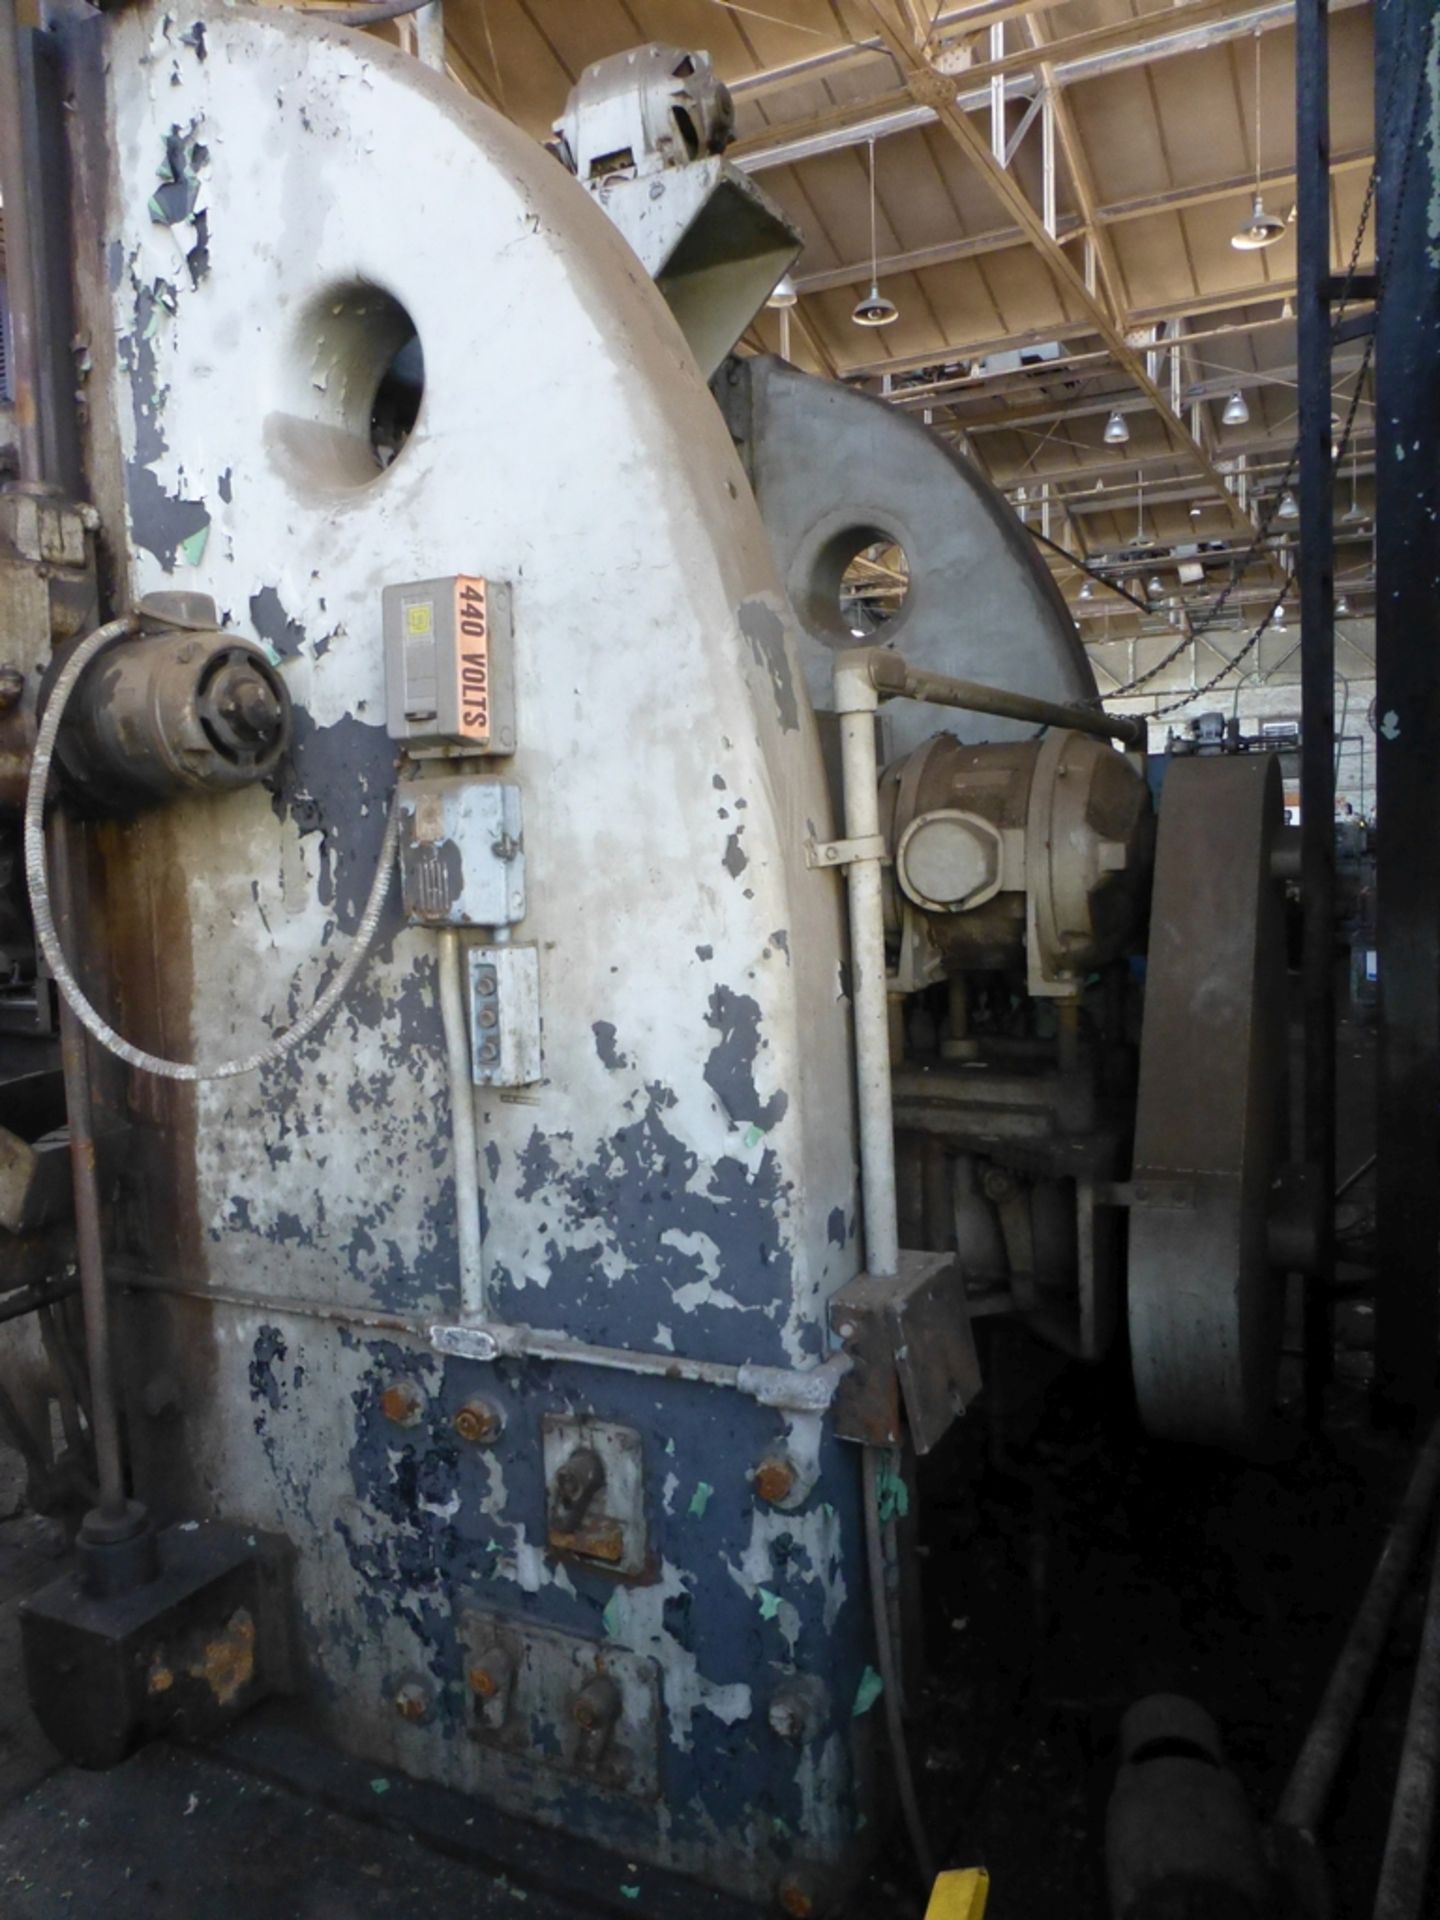 Colburn 72" Vertical Boring Mill|4-Jaw Table; Includes Turret & Ram; Model: 63RR6268; S/N E5256 - Image 11 of 15